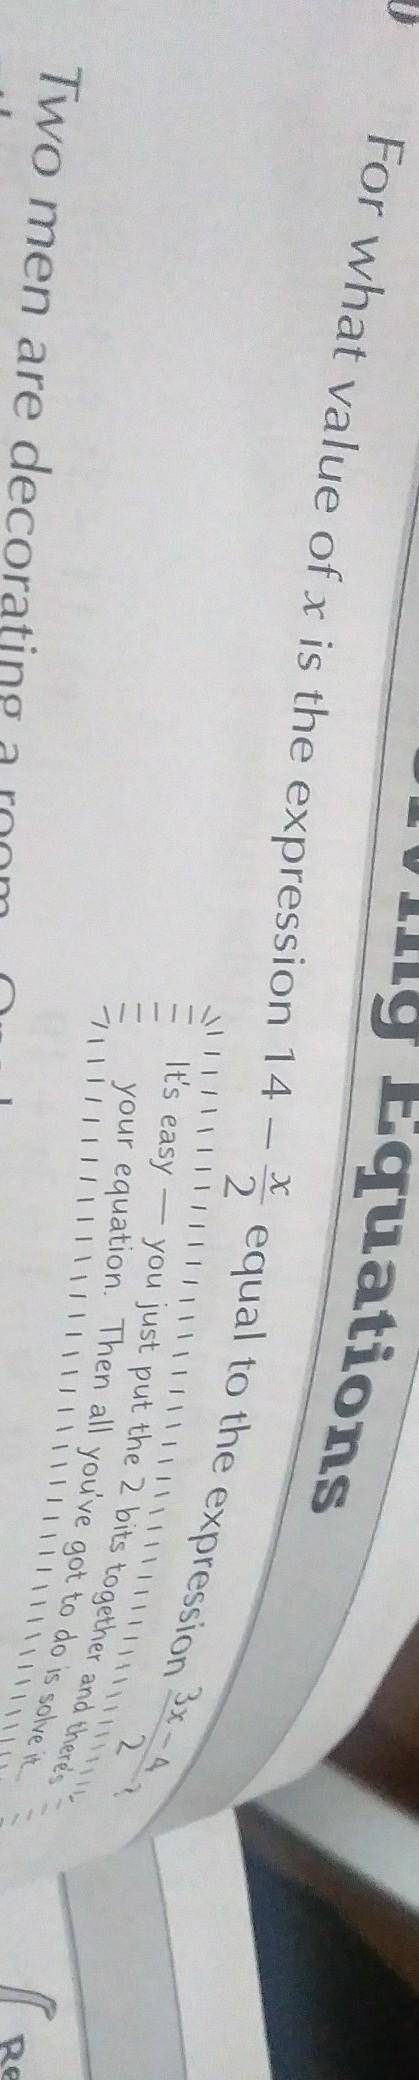 Please help me with this its an easy solving equation problem but I'm stuck